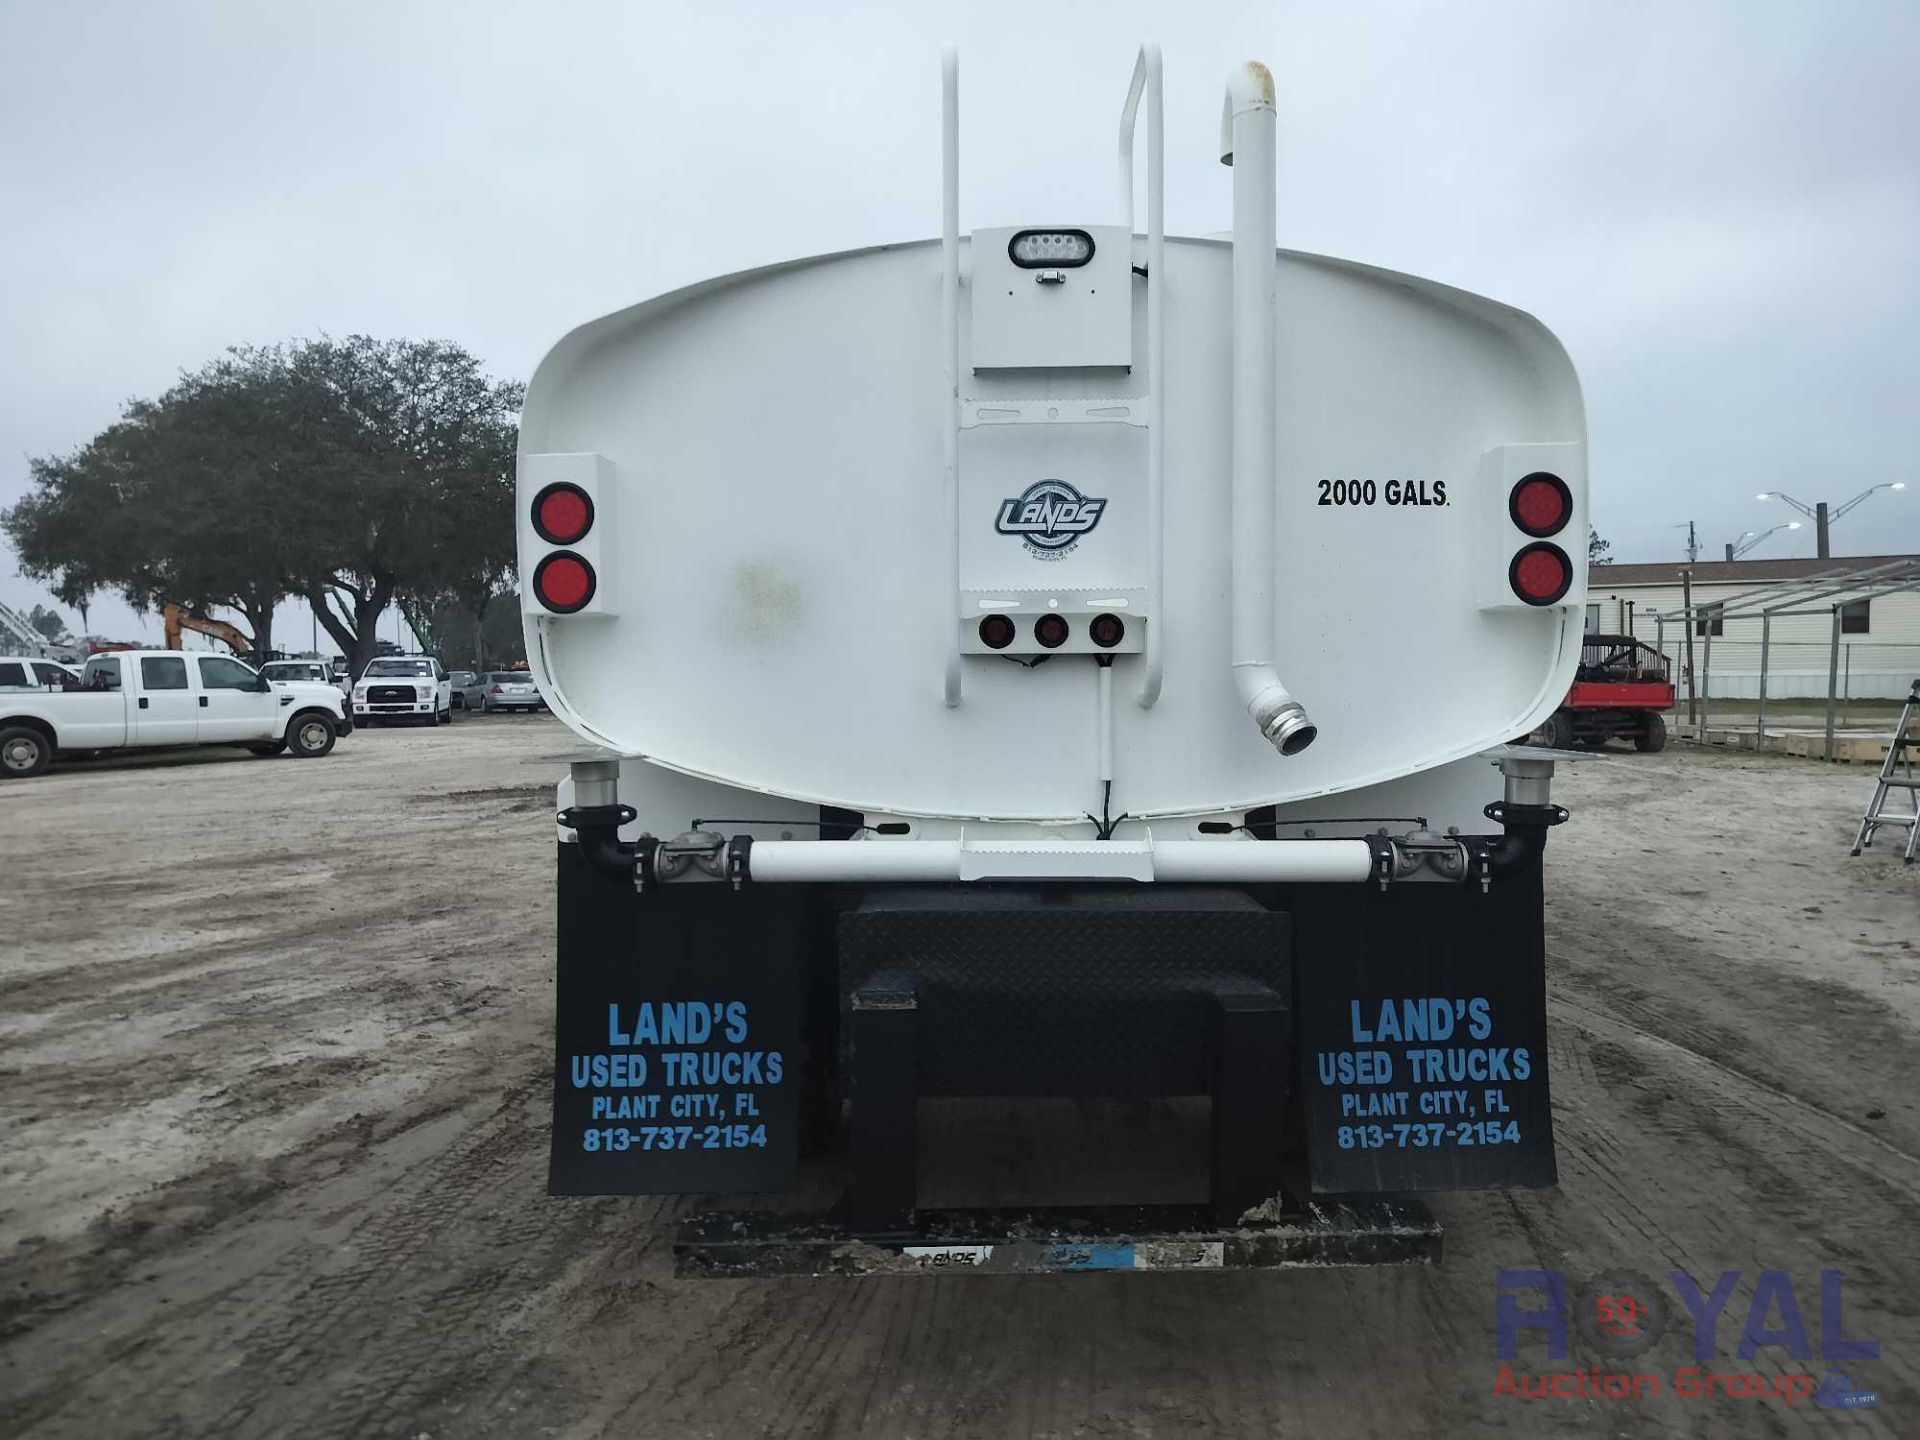 2010 Ford F-650 2,000 Gallon Water Truck - Image 28 of 32